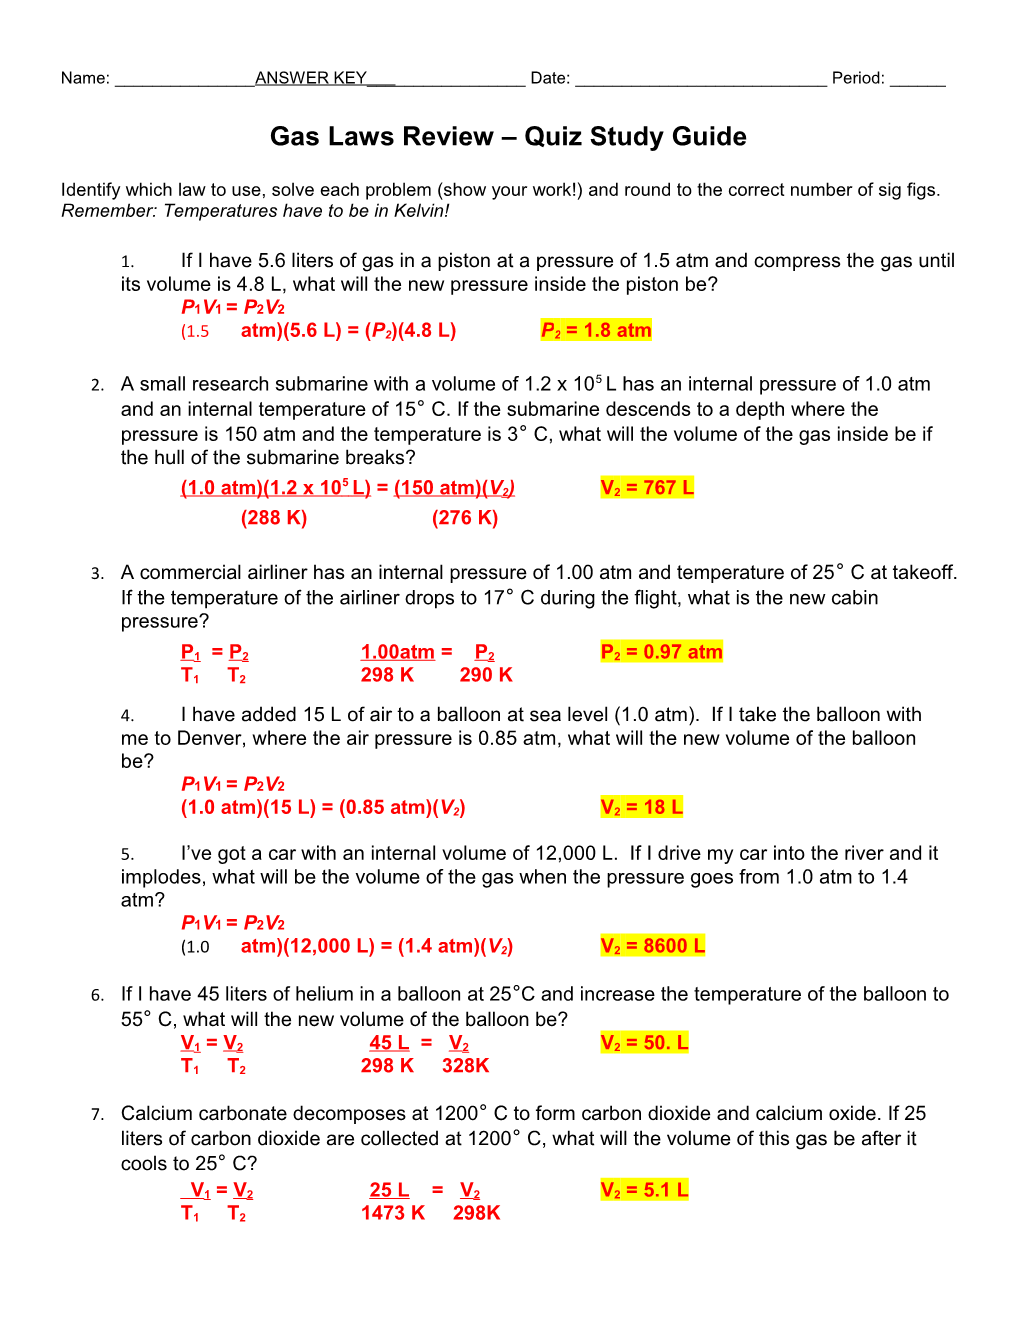 Gas Laws Review Quiz Study Guide